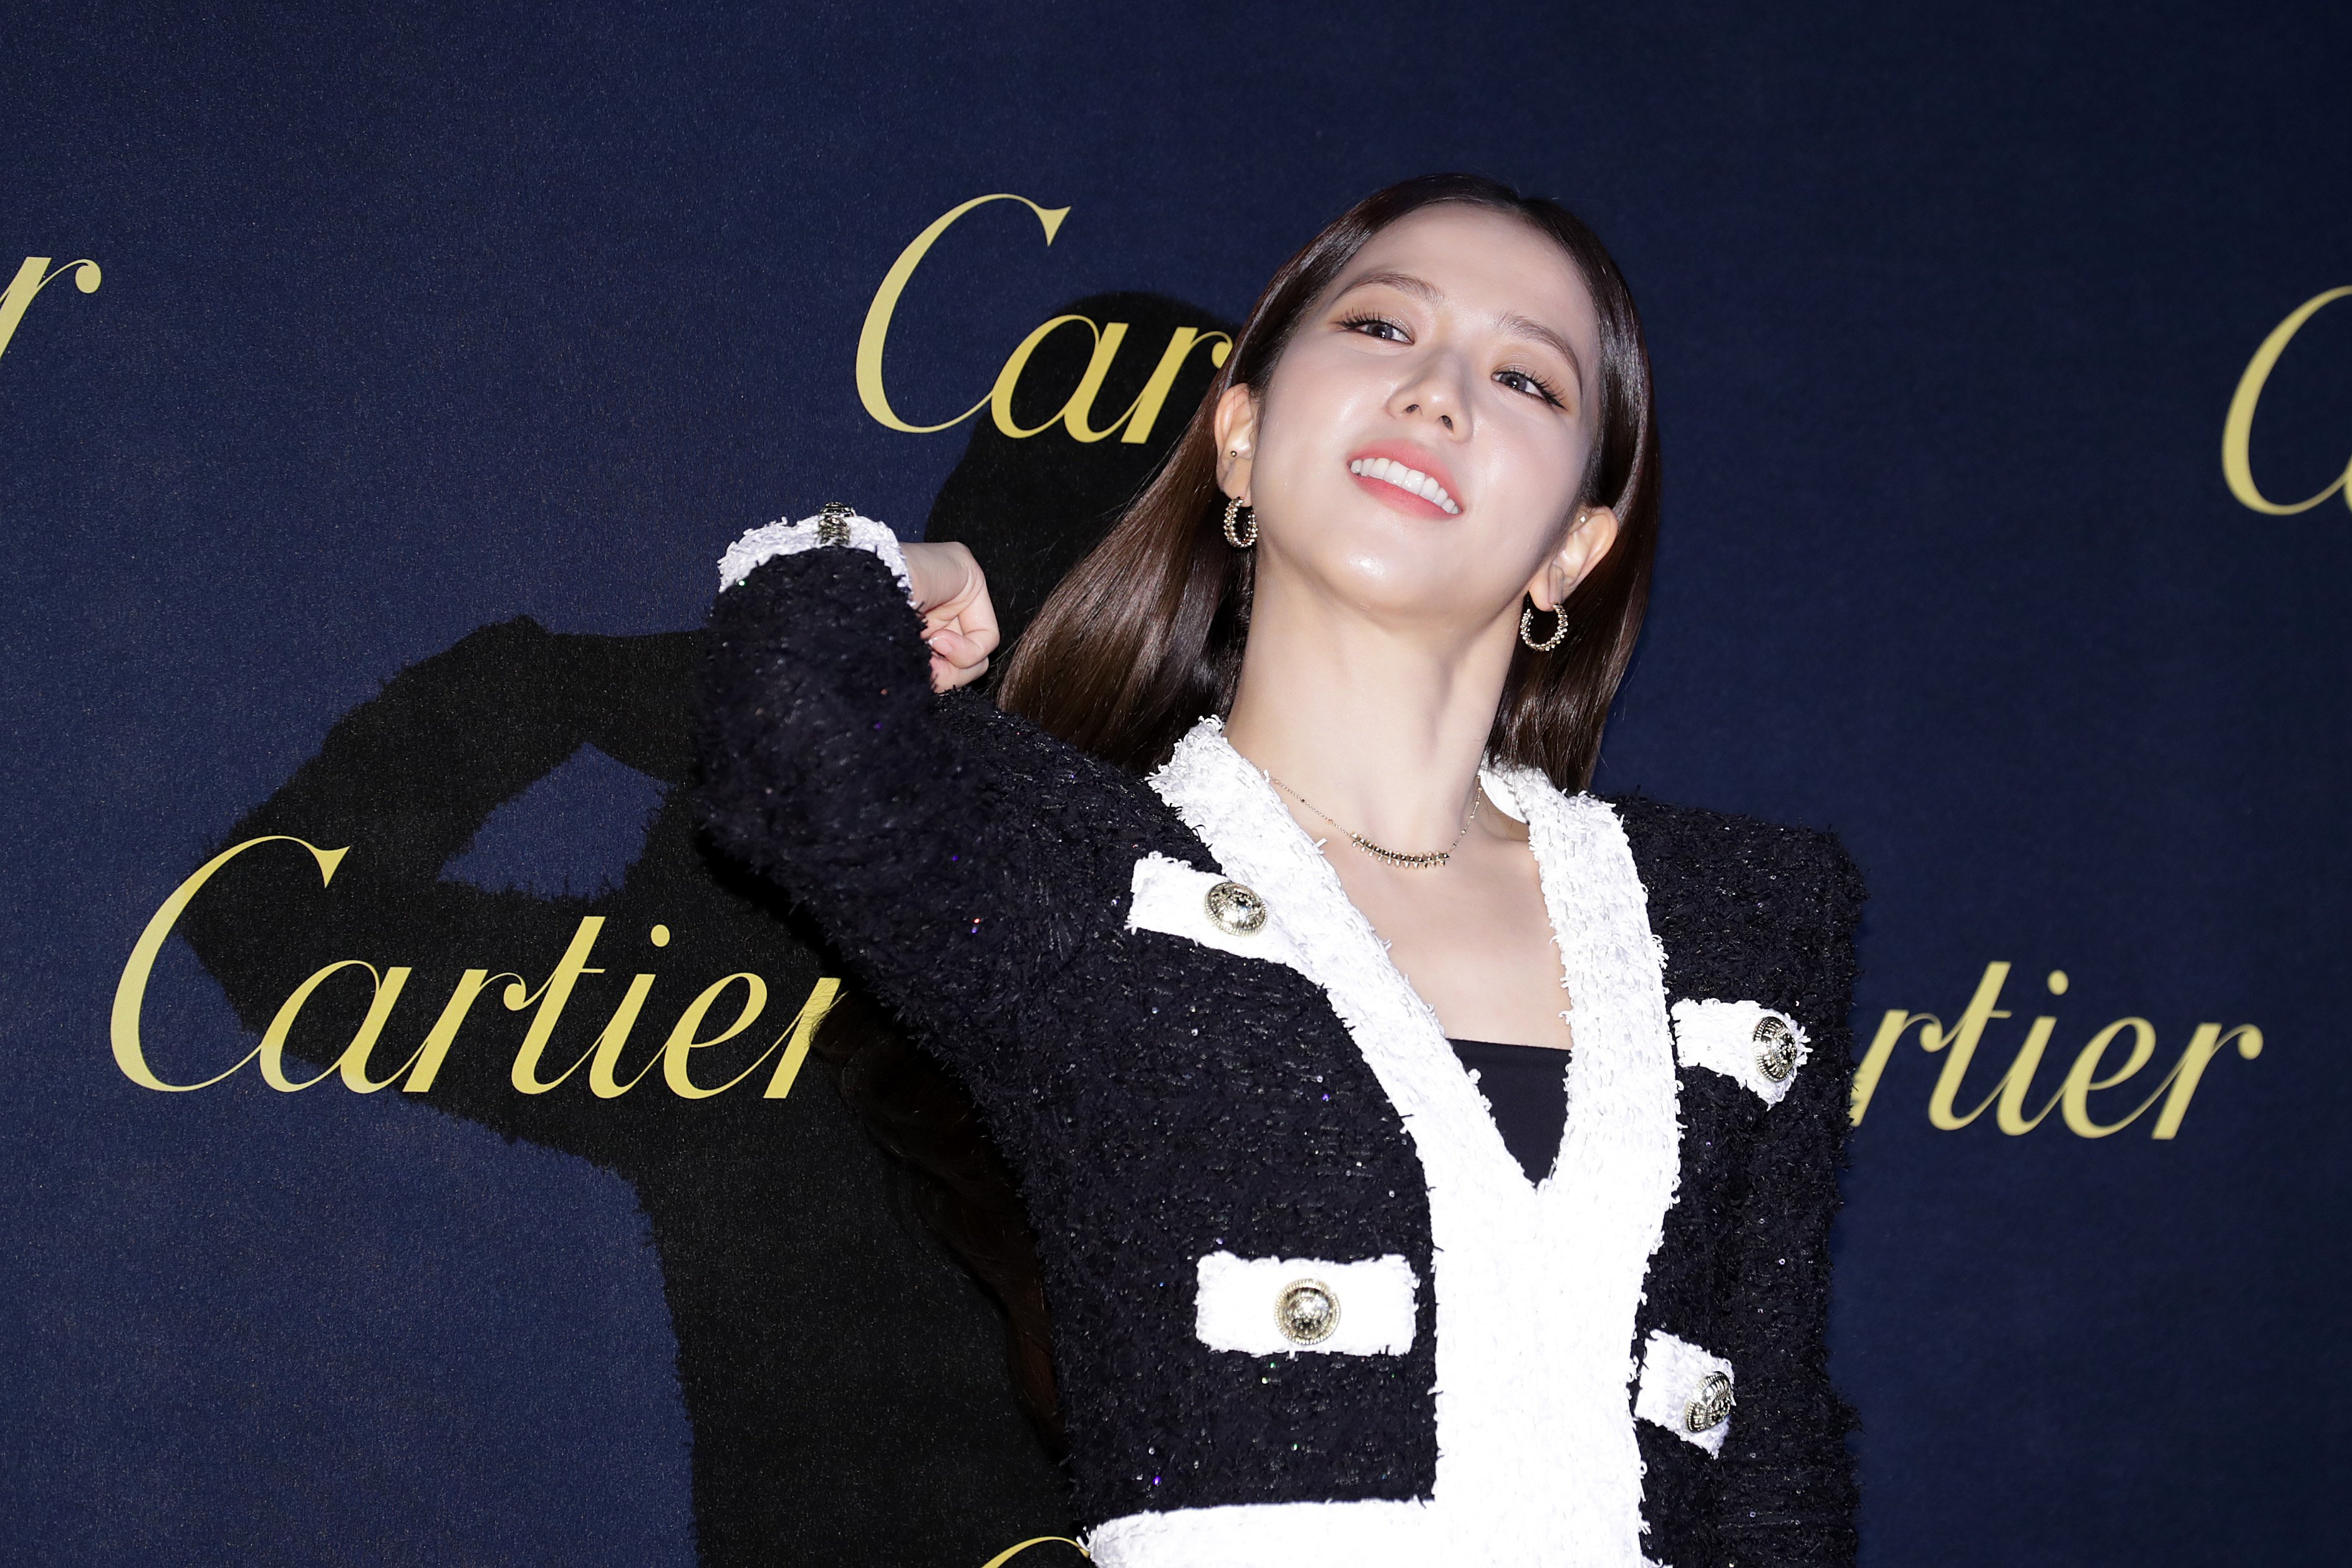 Jisoo of BLACKPINK attends the photo call for 'Cartier' Juste Un Clou launch party